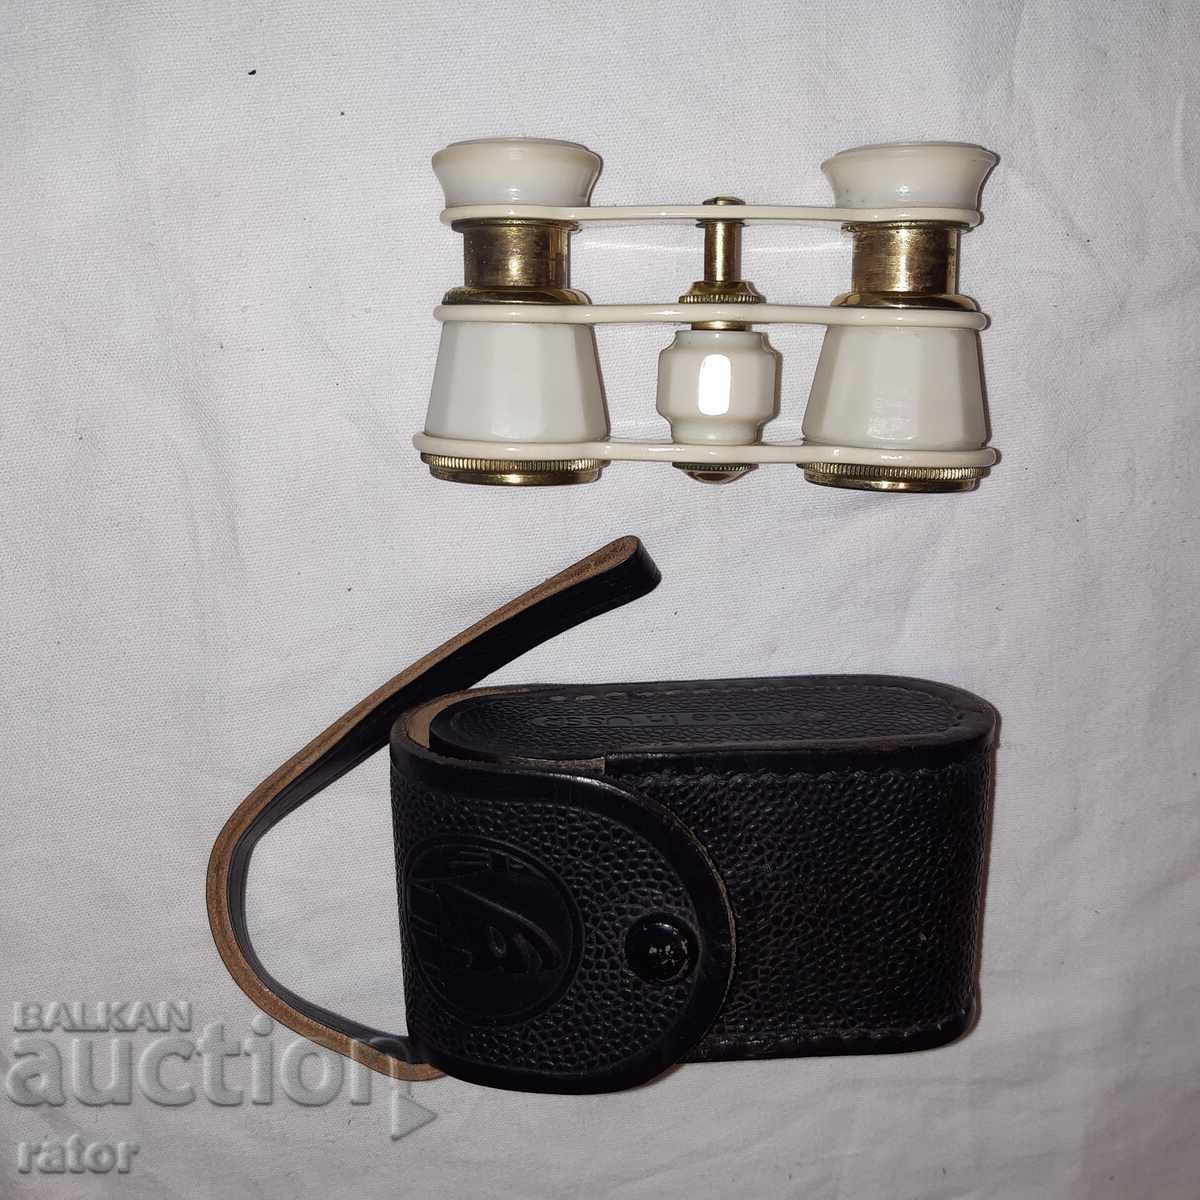 USSR theater binoculars with case